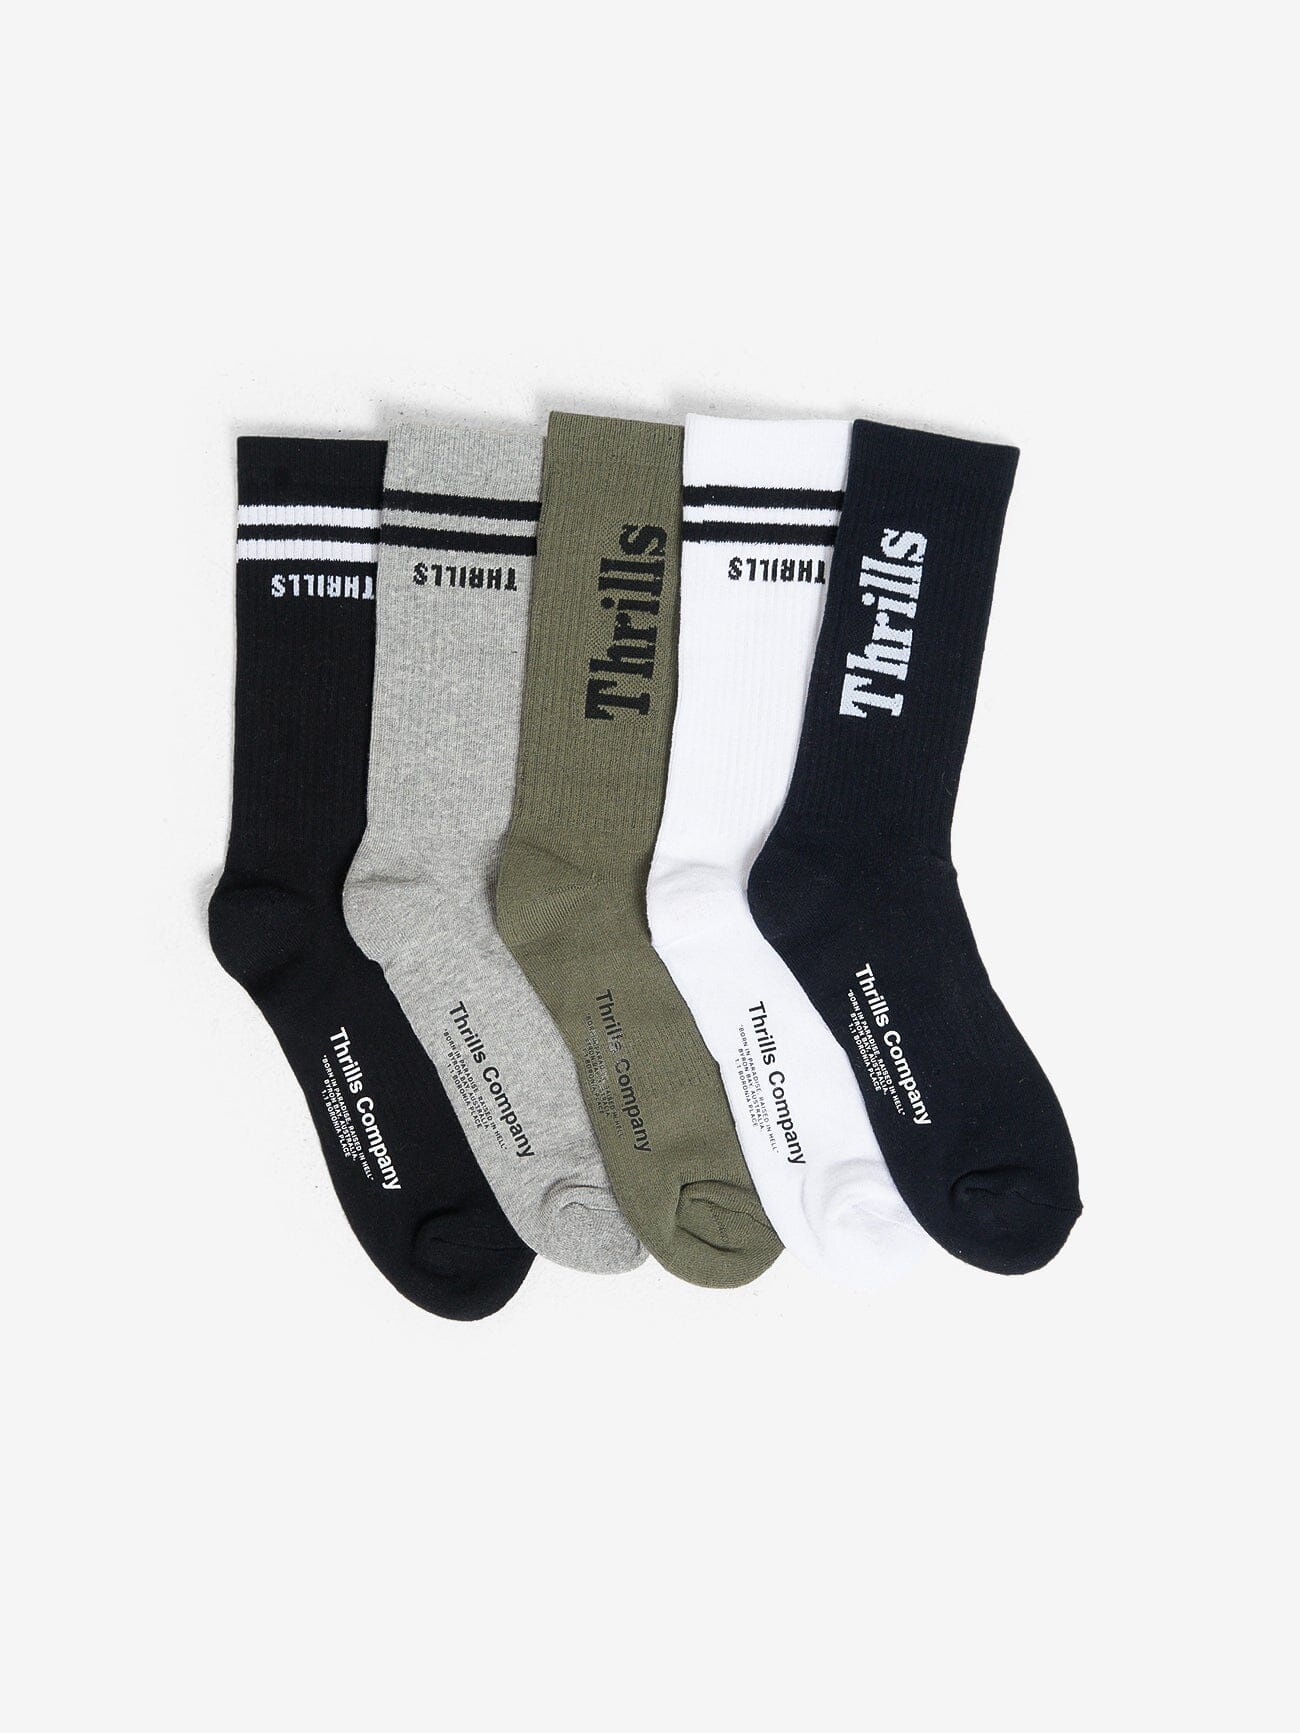 Minimal Thrills 5 Pack Sock - Black / White / Army Green / Total Eclipse / Grey Marle